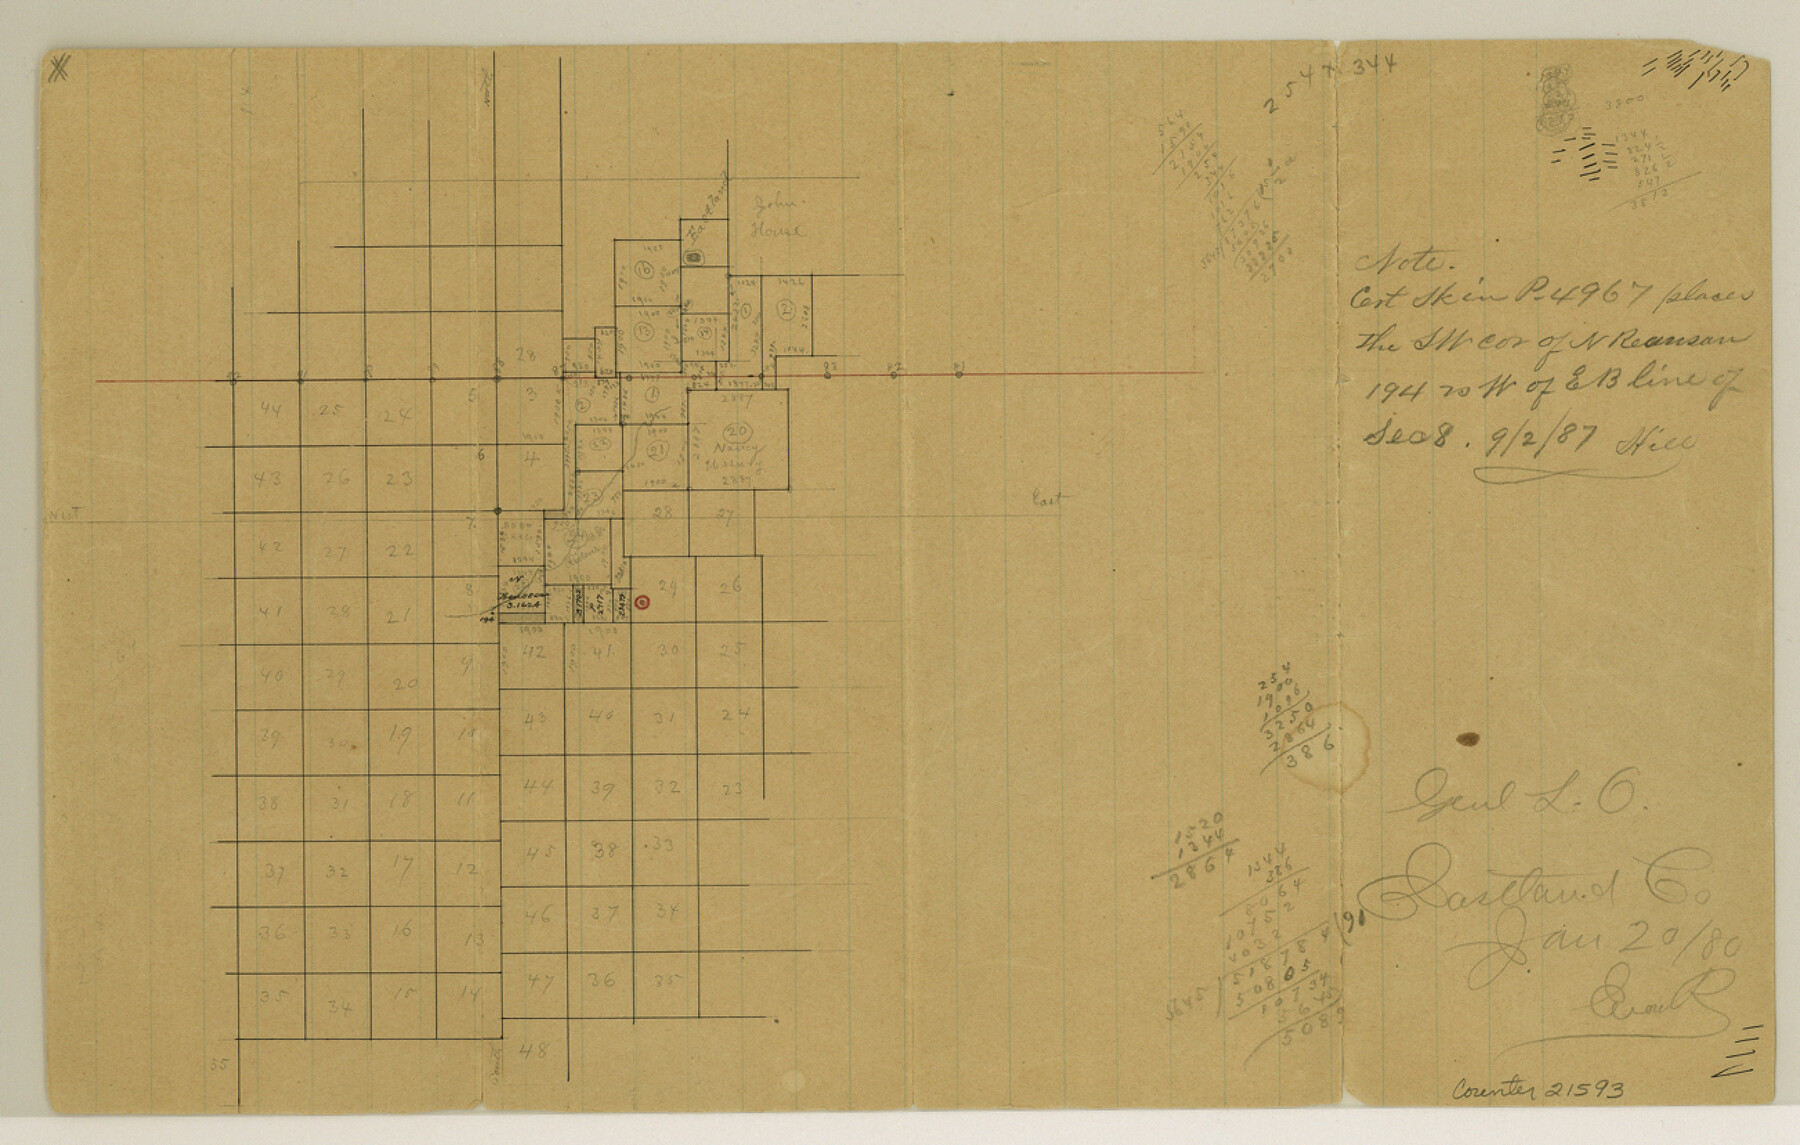 21593, Eastland County Sketch File 13, General Map Collection